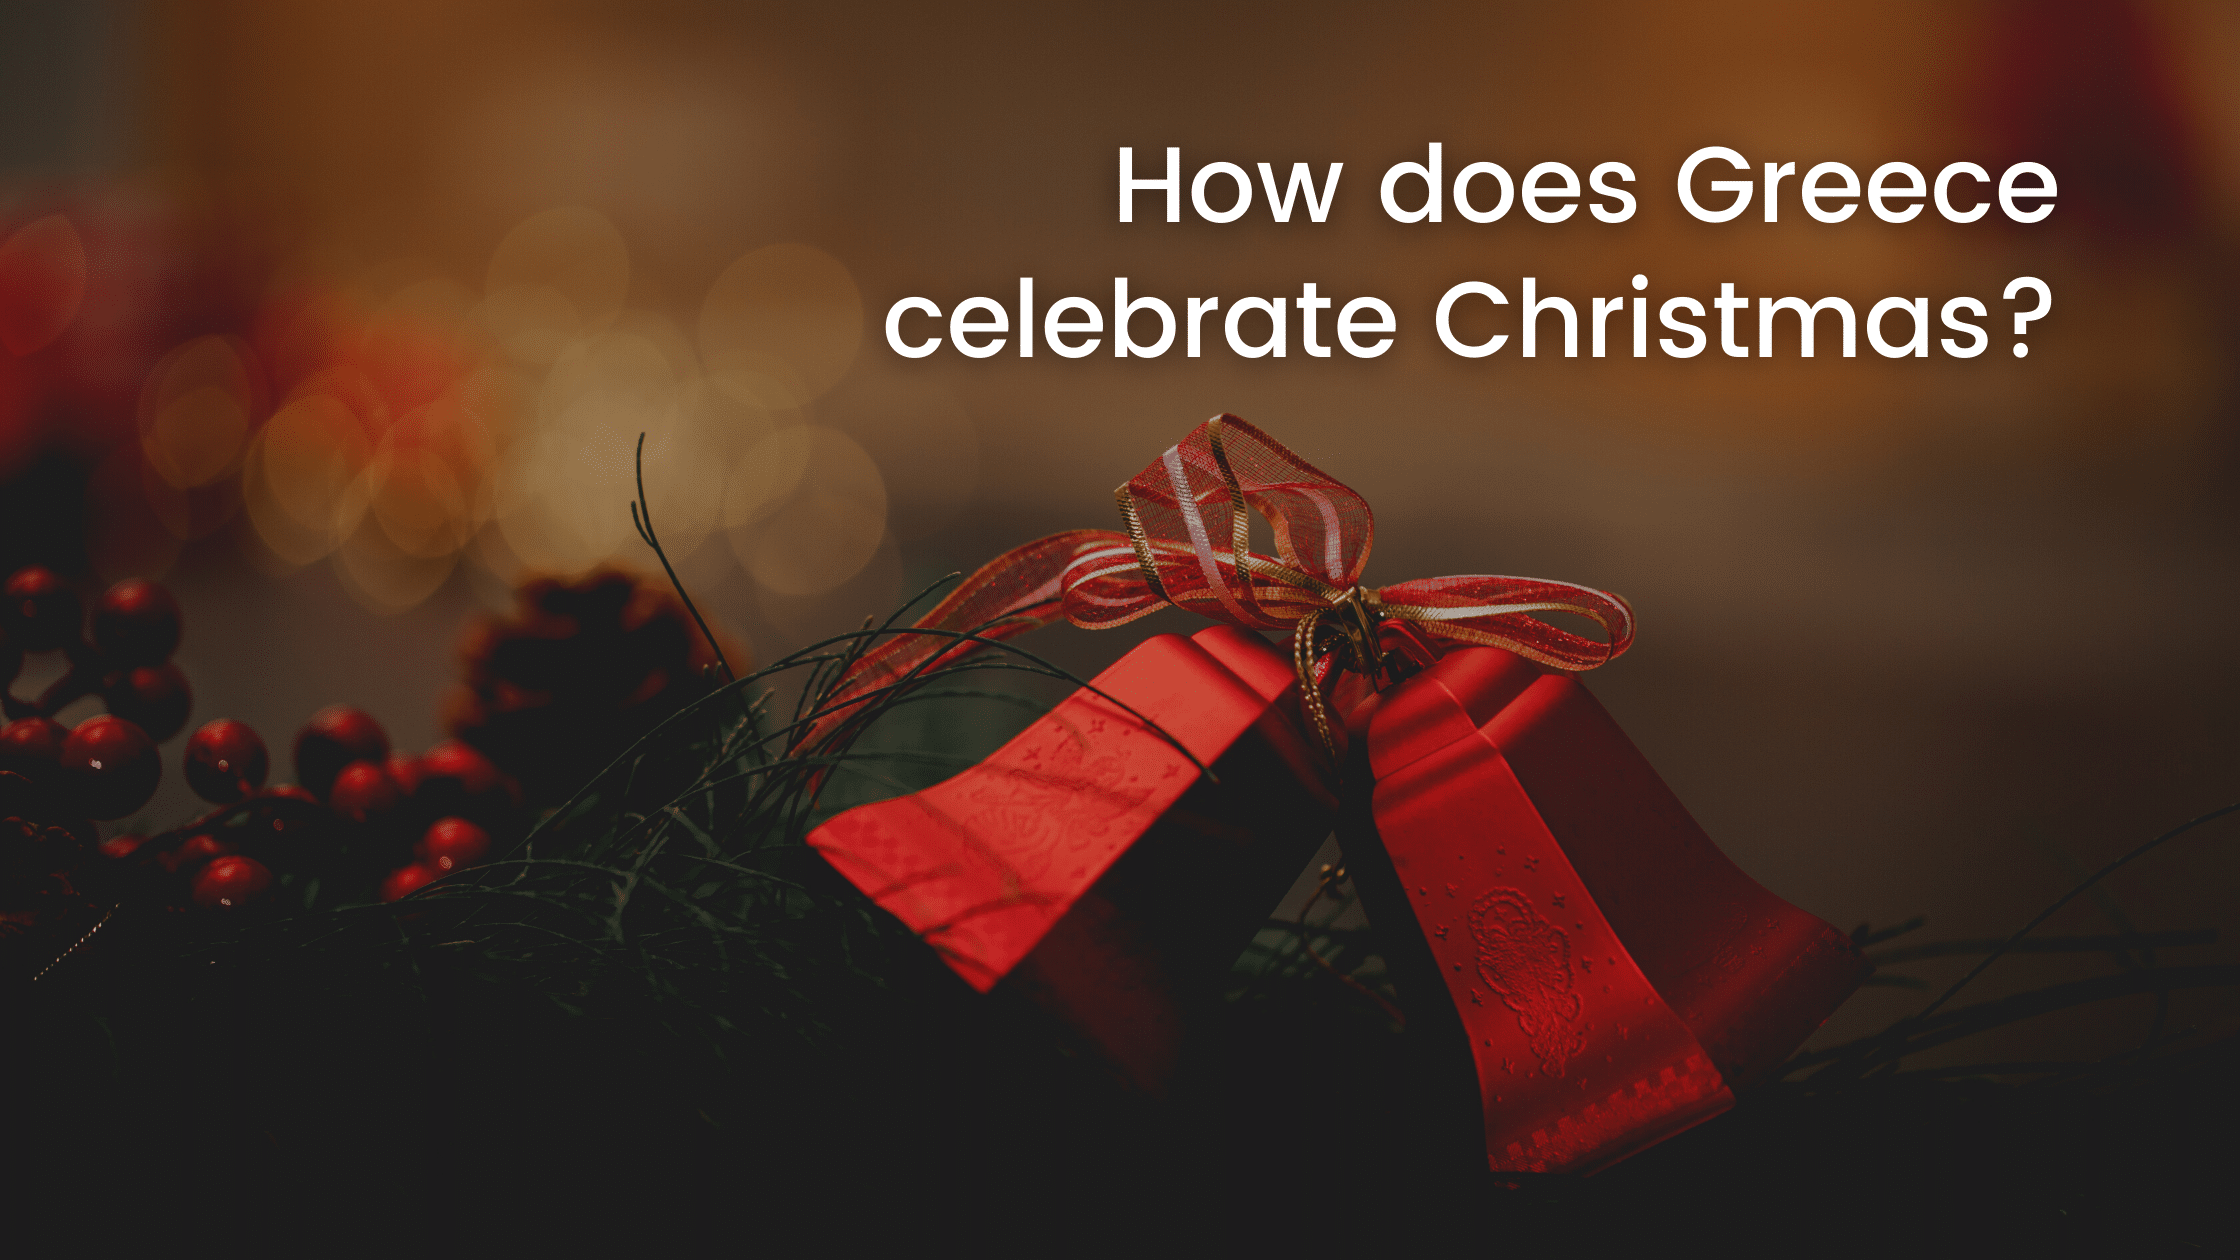 How does Greece celebrate Christmas?